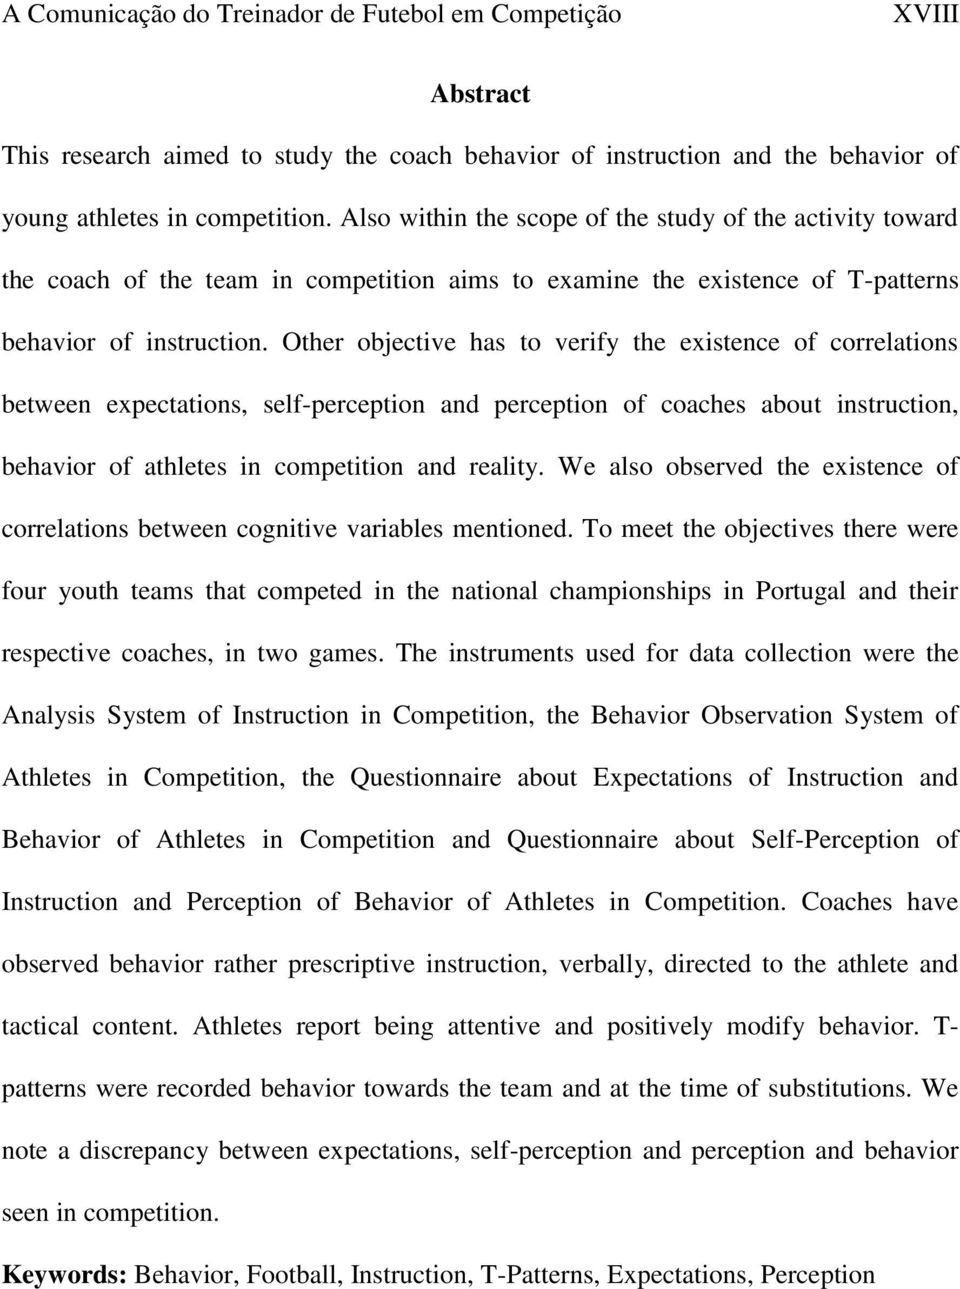 Other objective has to verify the existence of correlations between expectations, self-perception and perception of coaches about instruction, behavior of athletes in competition and reality.